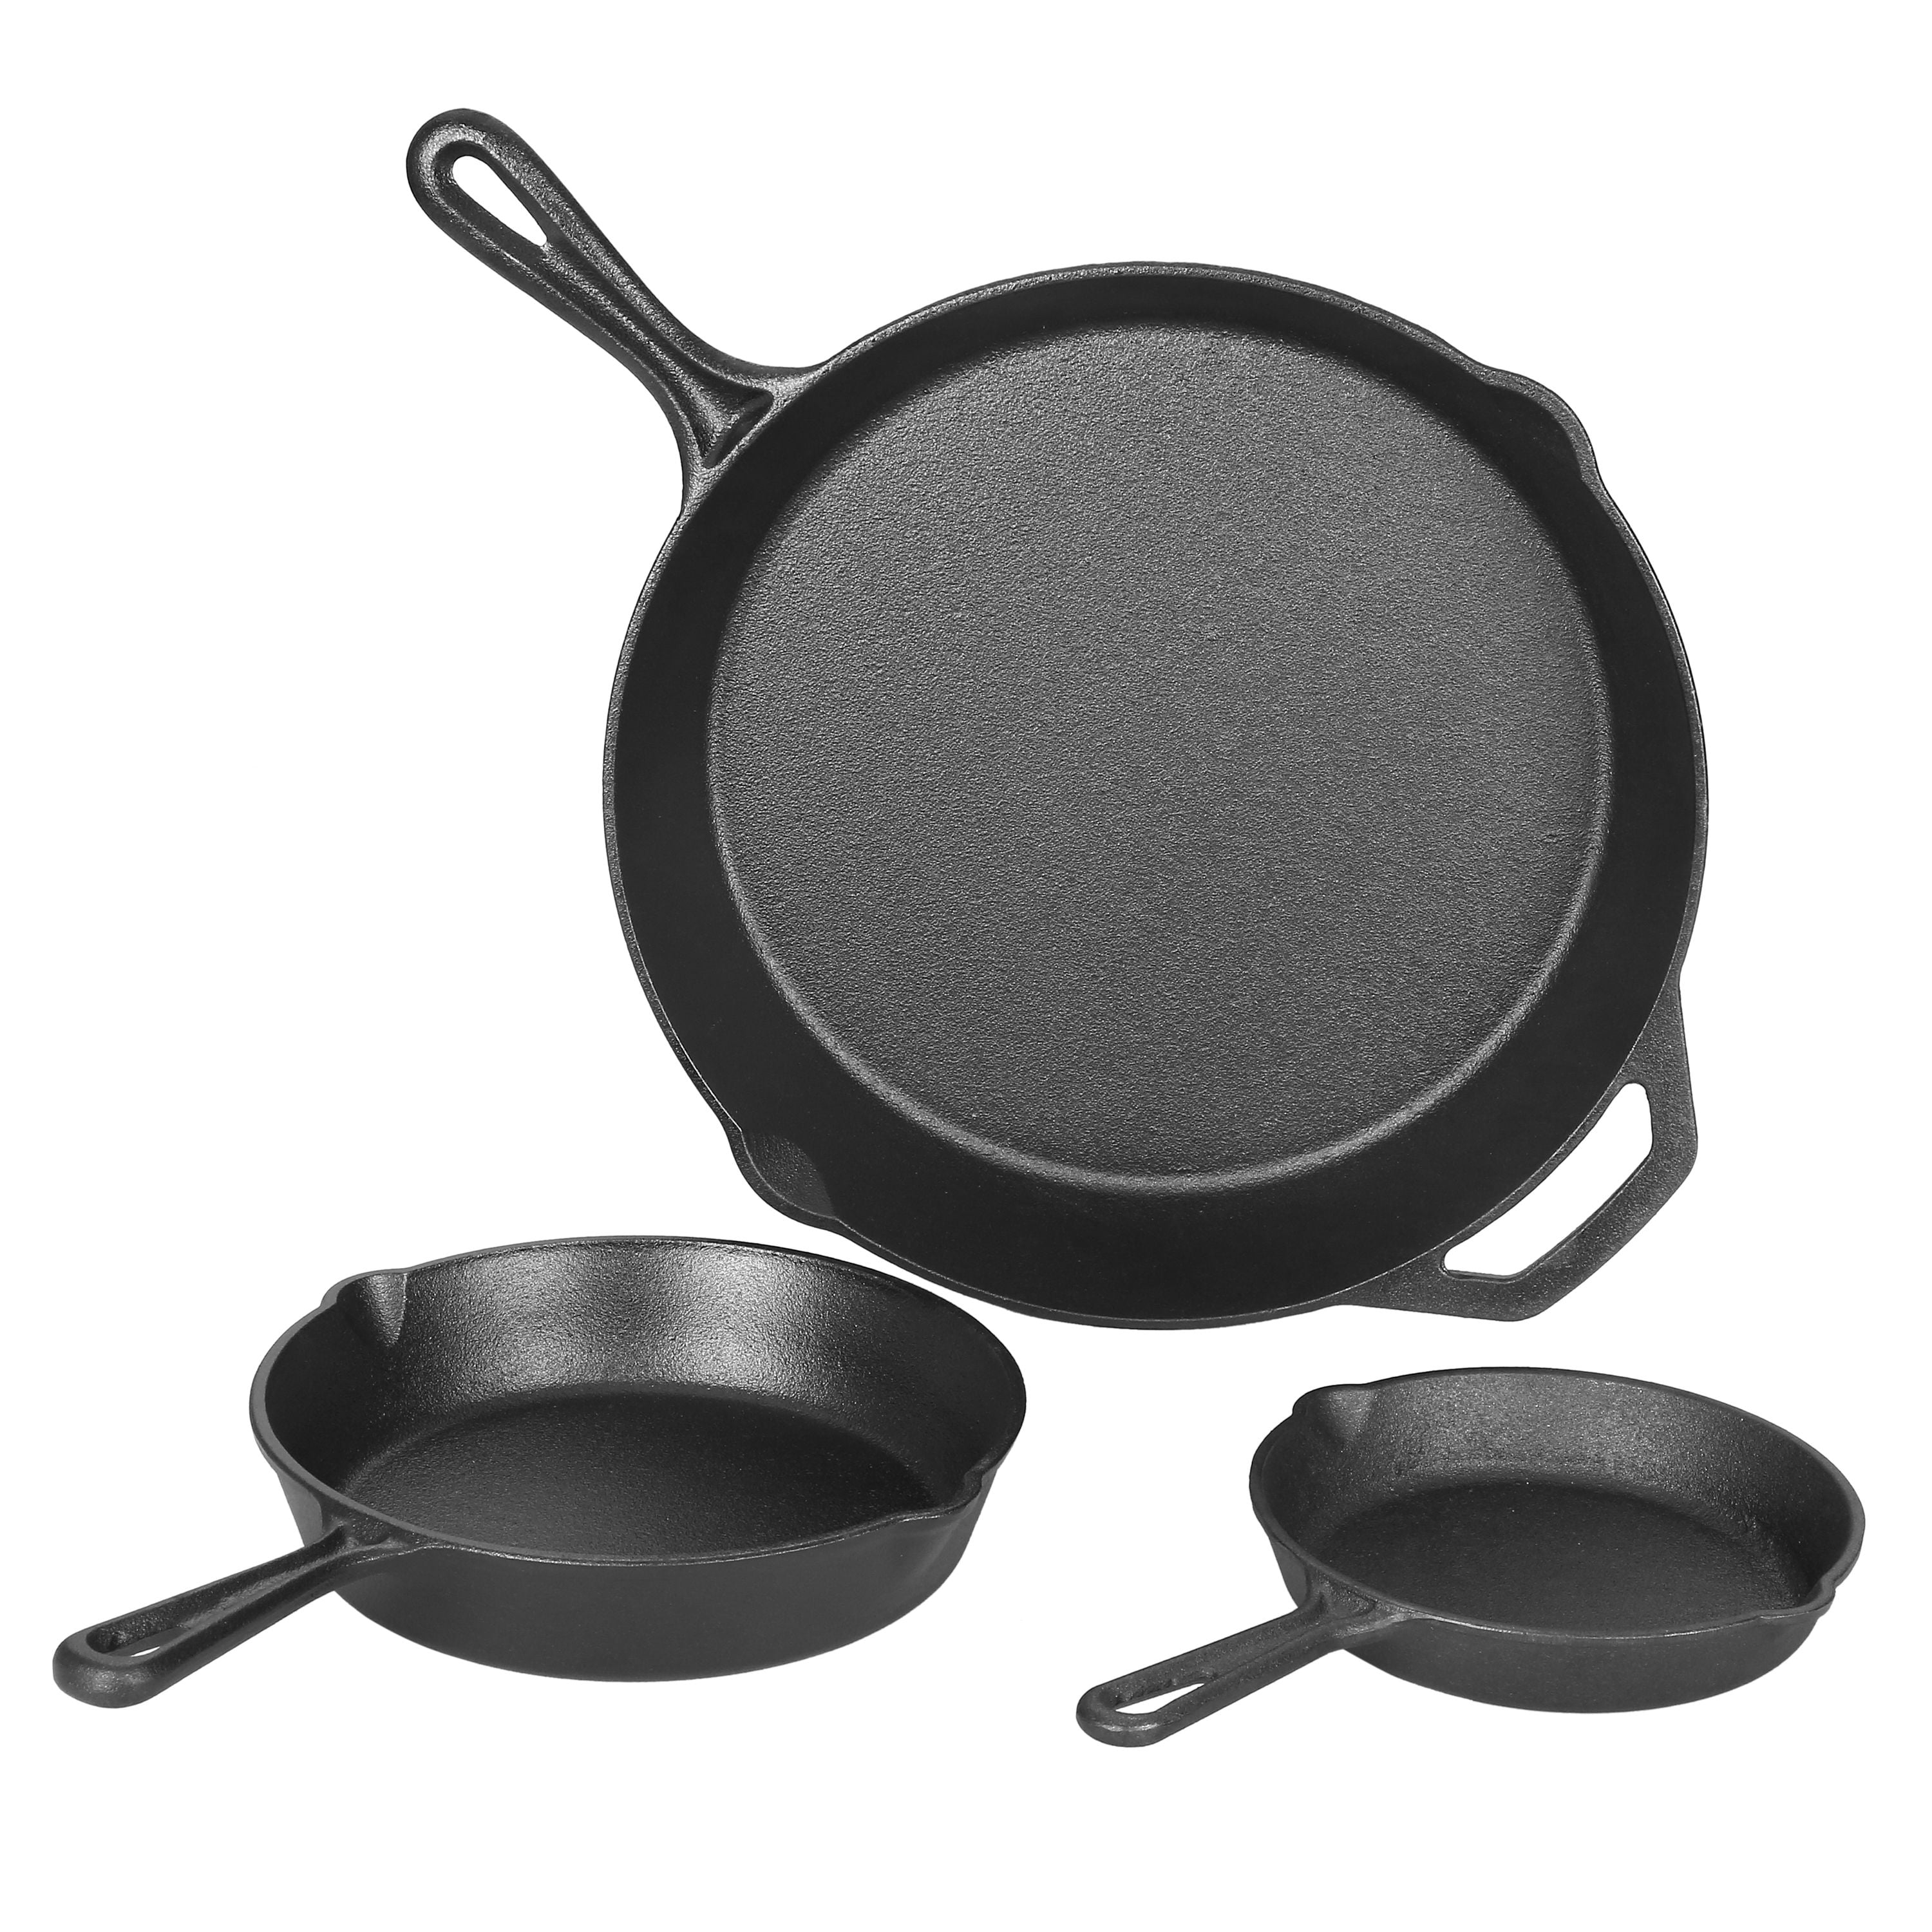 This 3-Piece Cast Iron Skillet Set Is $60 on